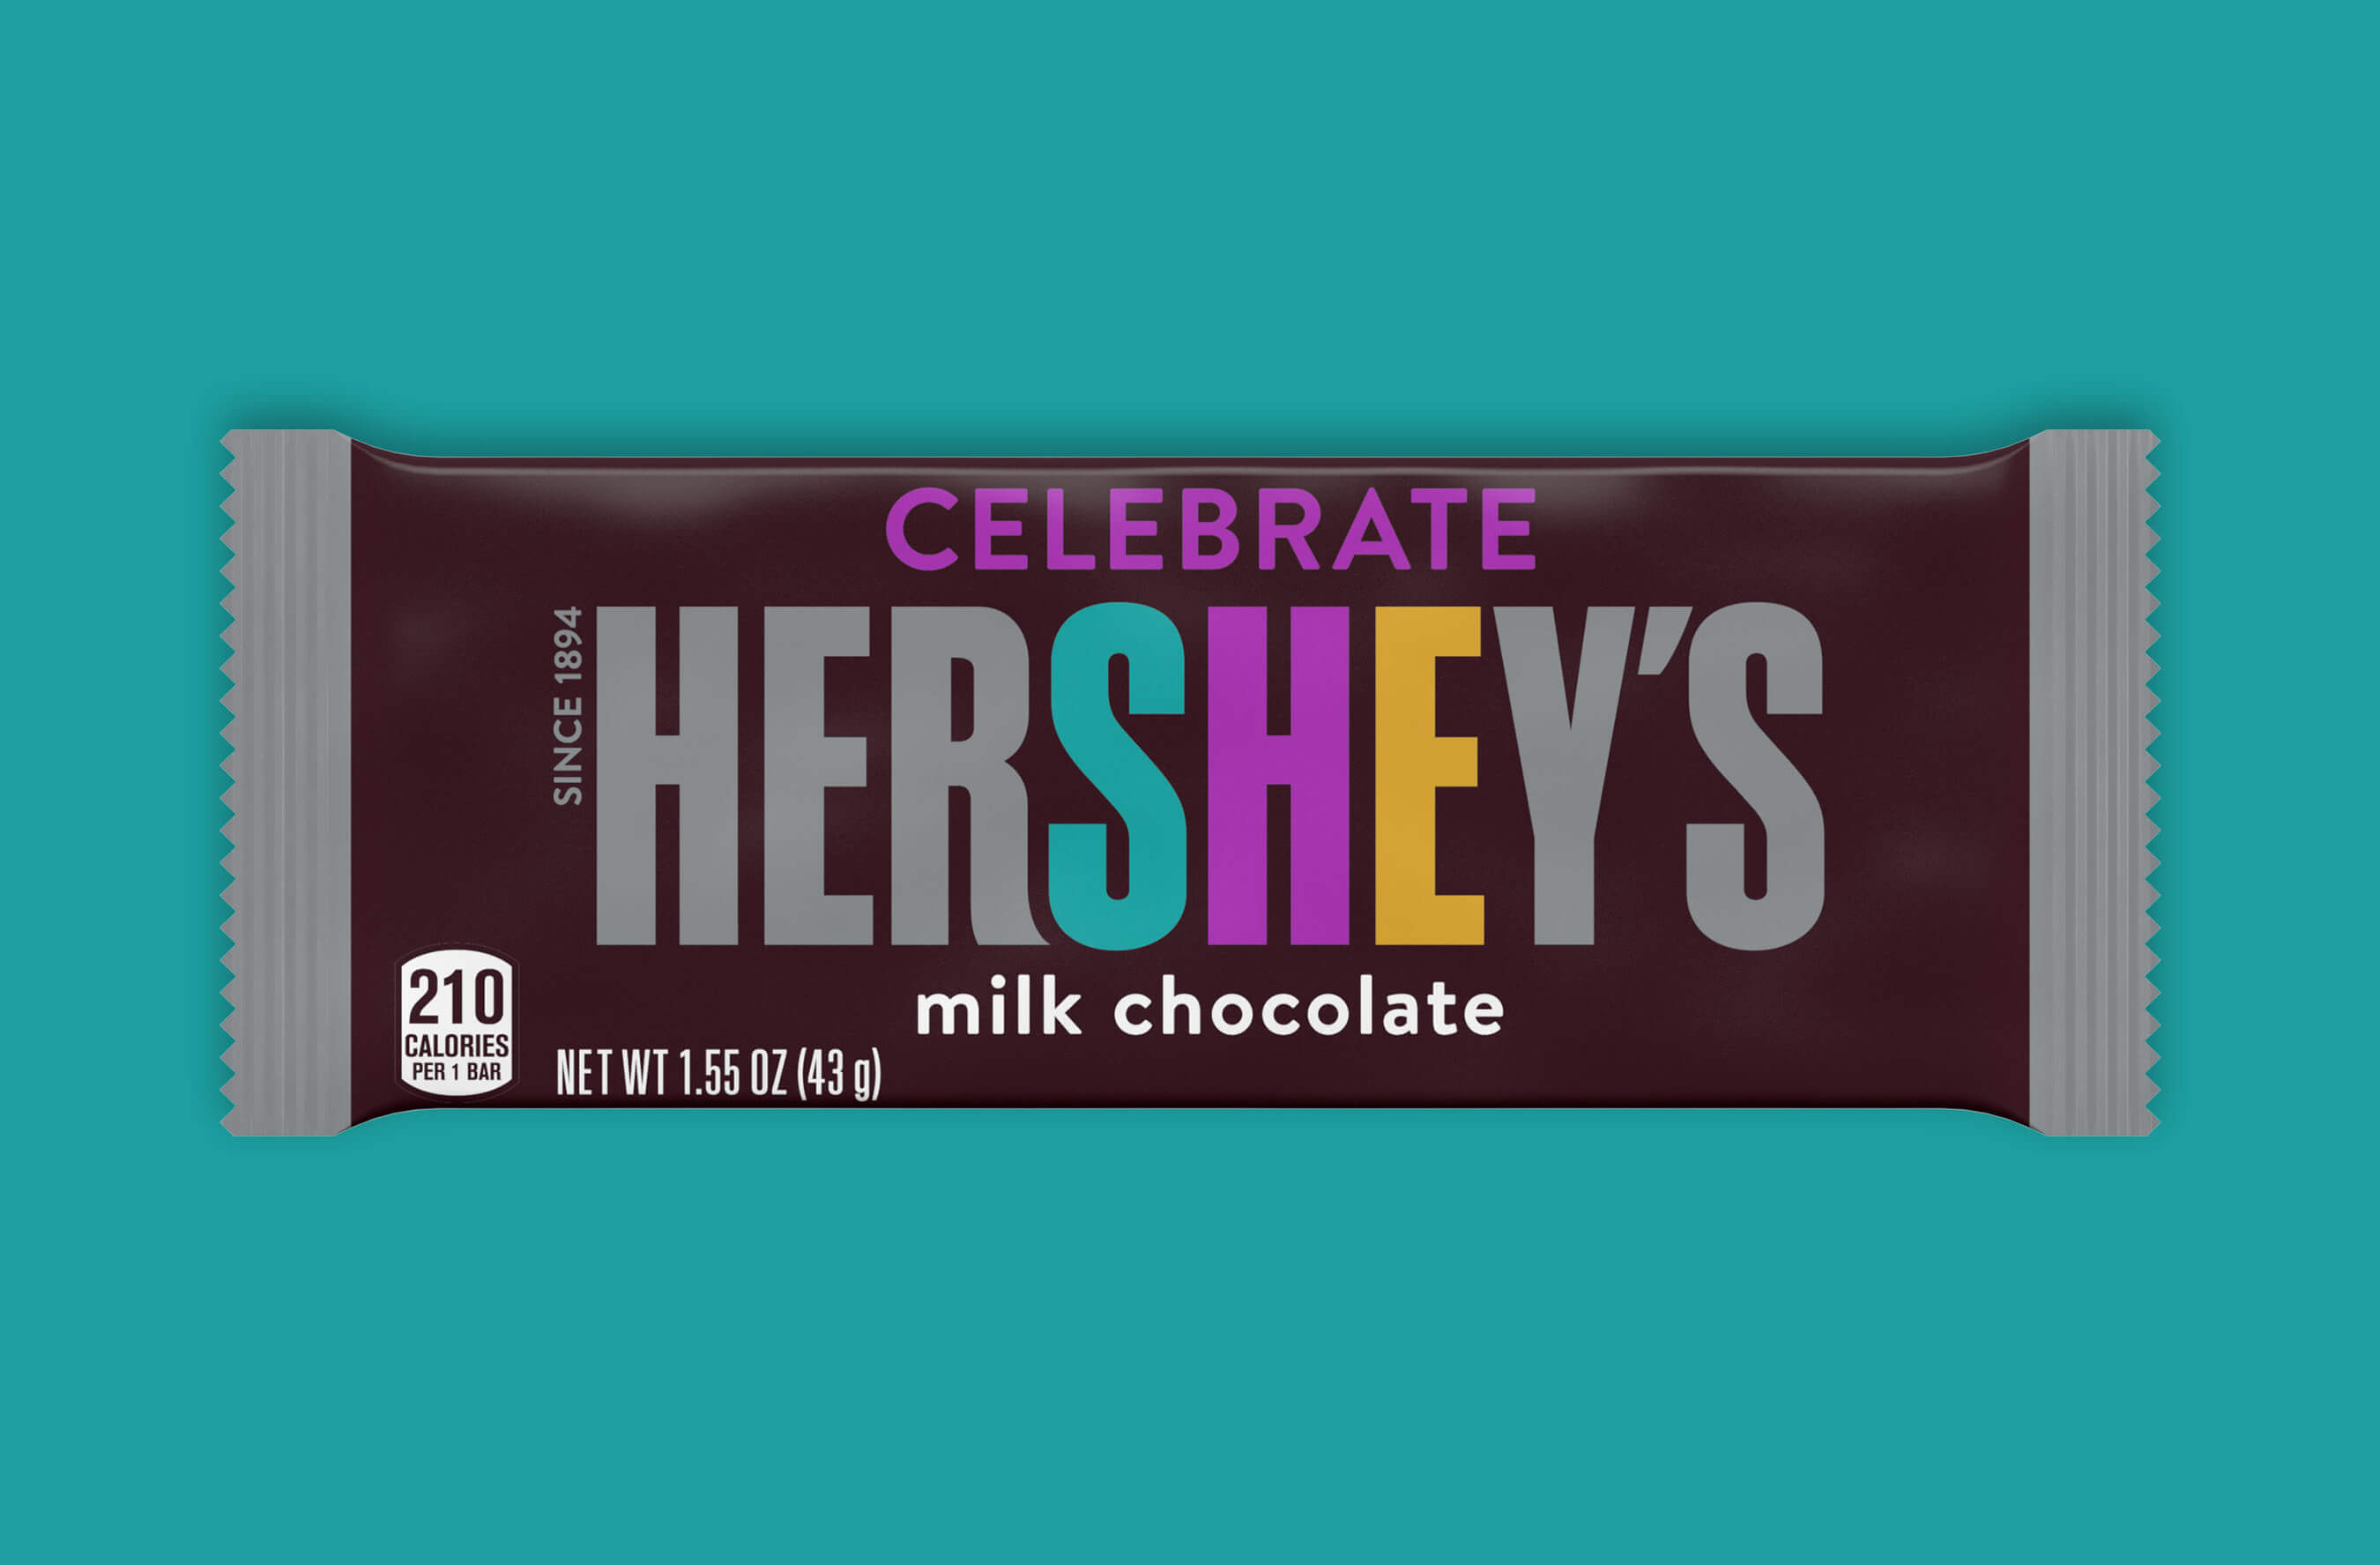 Limited edition Hershey’s packaging for Women’s History Month